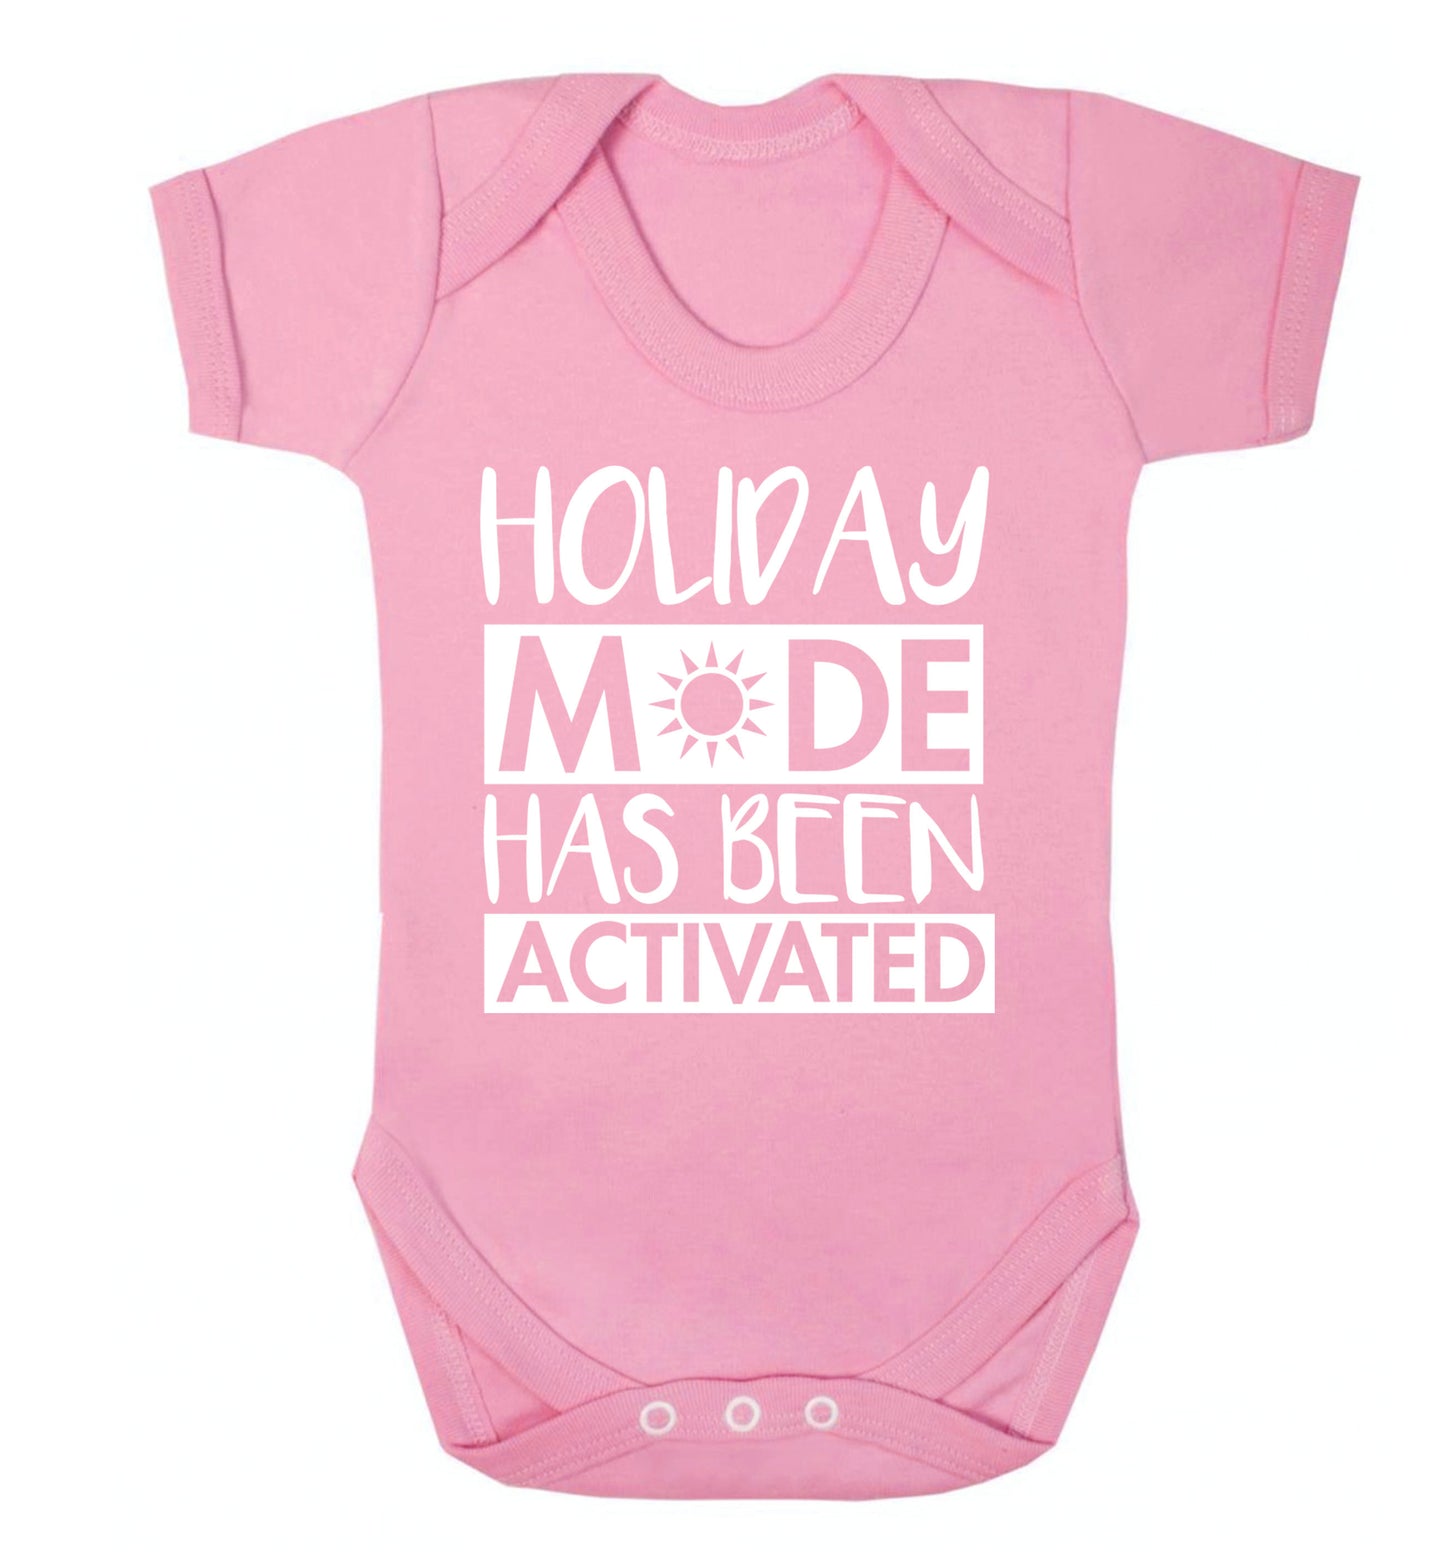 Holiday mode has been activated Baby Vest pale pink 18-24 months